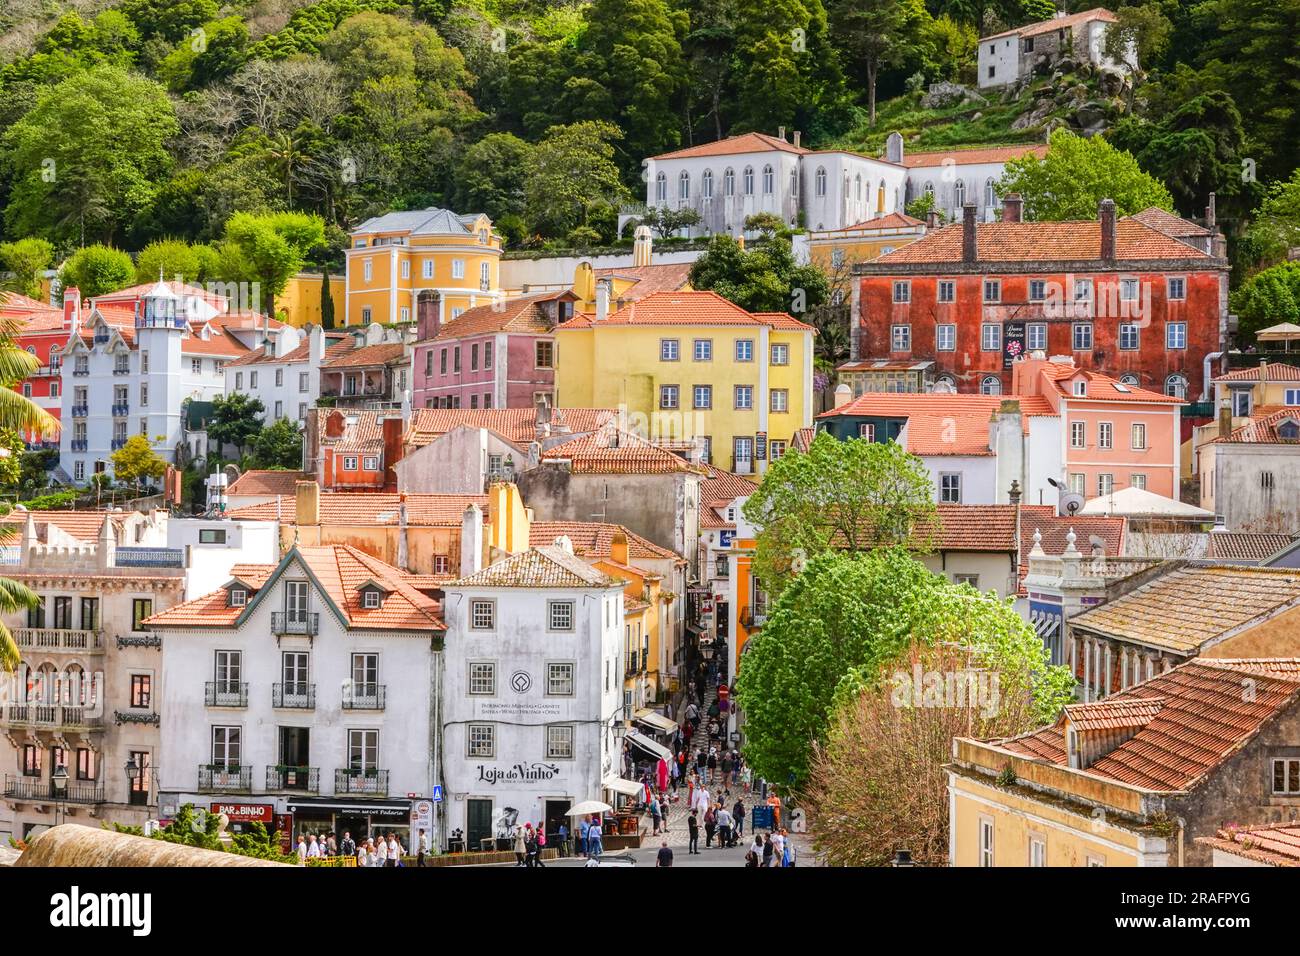 The historic town and central square of Sao Martinho, from the gardens of the Sintra National Palace in Sintra, Portugal. The Romanticist architectural and fairytale palaces draws tourists from around the world. Stock Photo